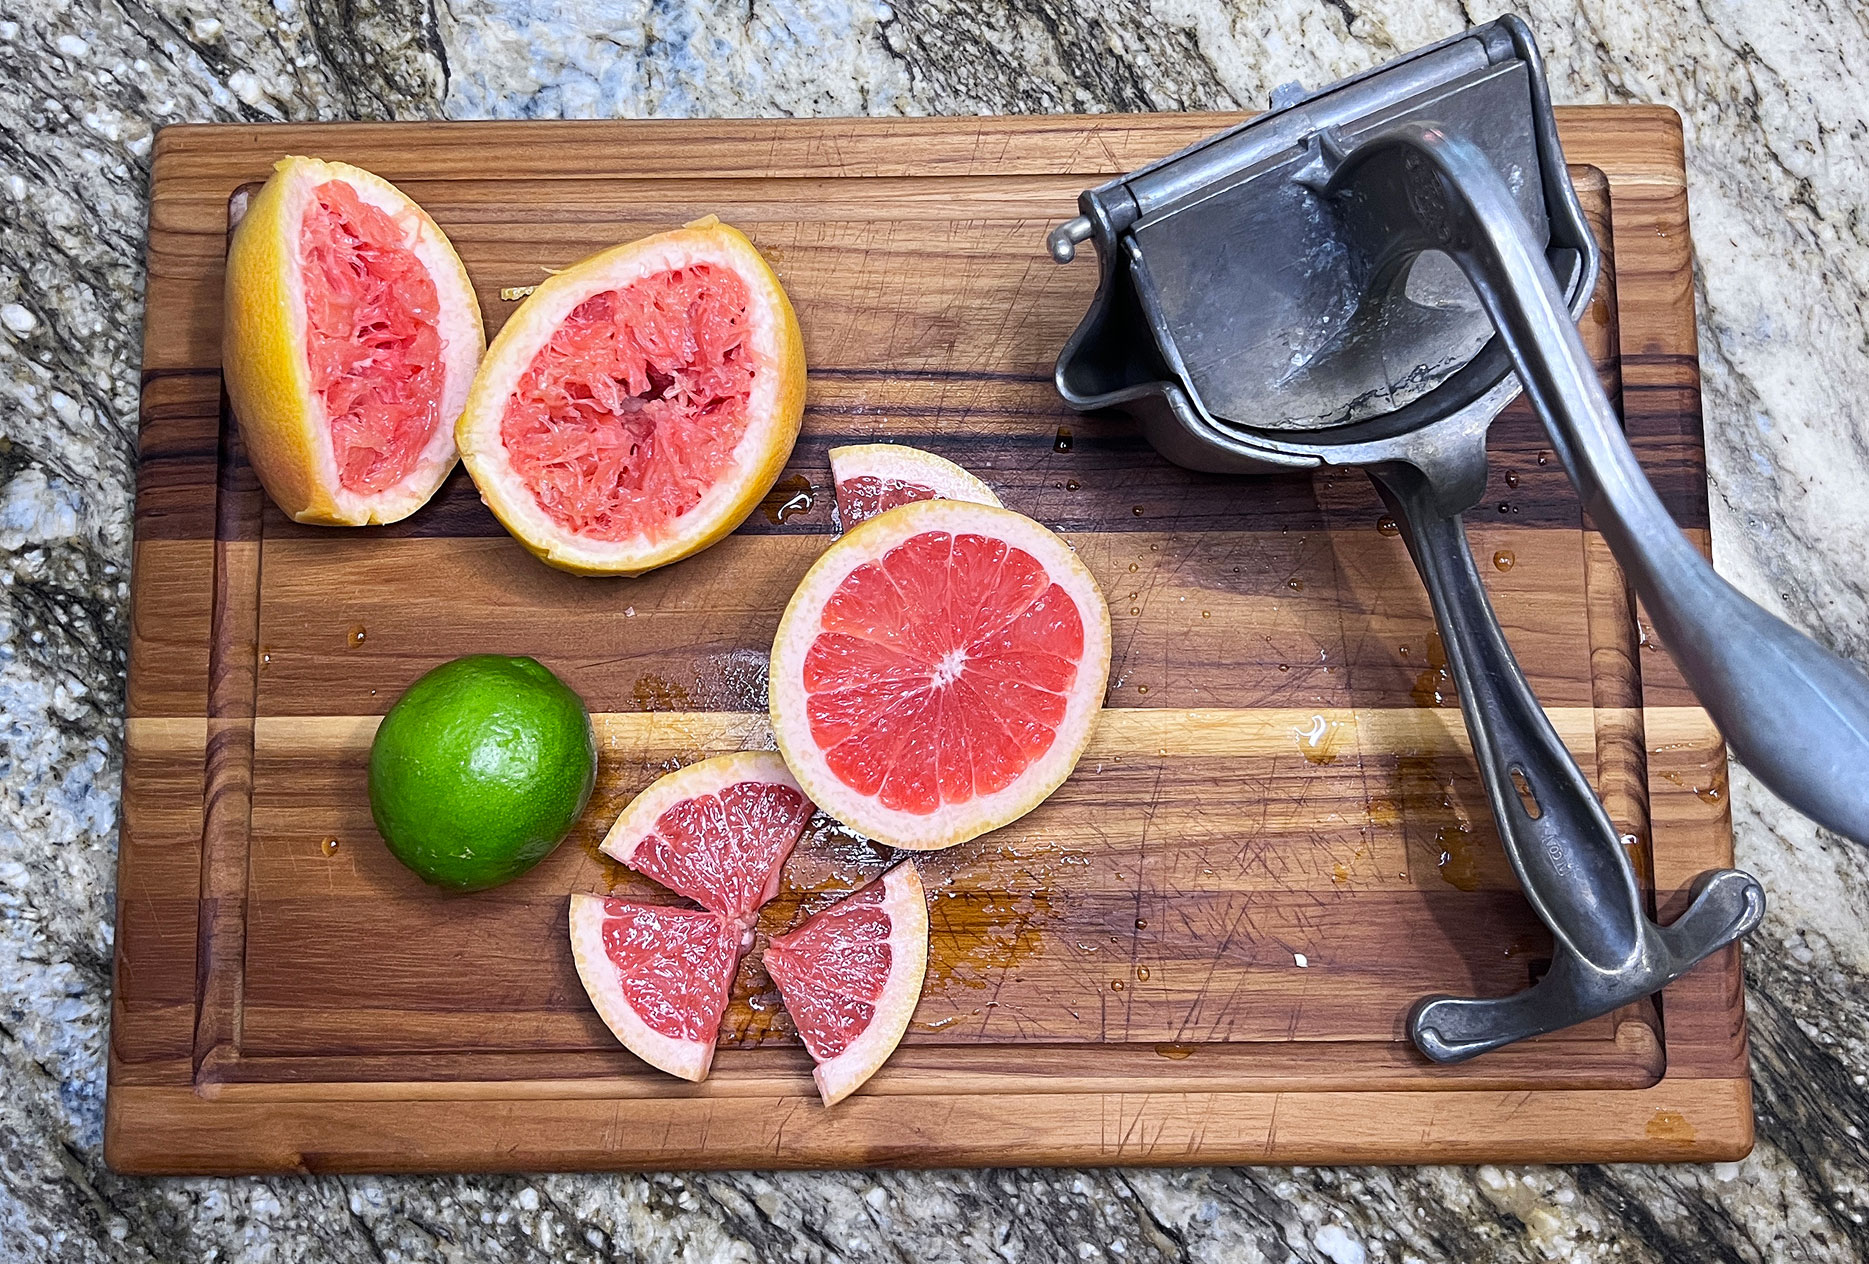 making fresh juice for spicy grapefruit margarita, vintage juicer, grapefruits and lime shown on a wood cutting board